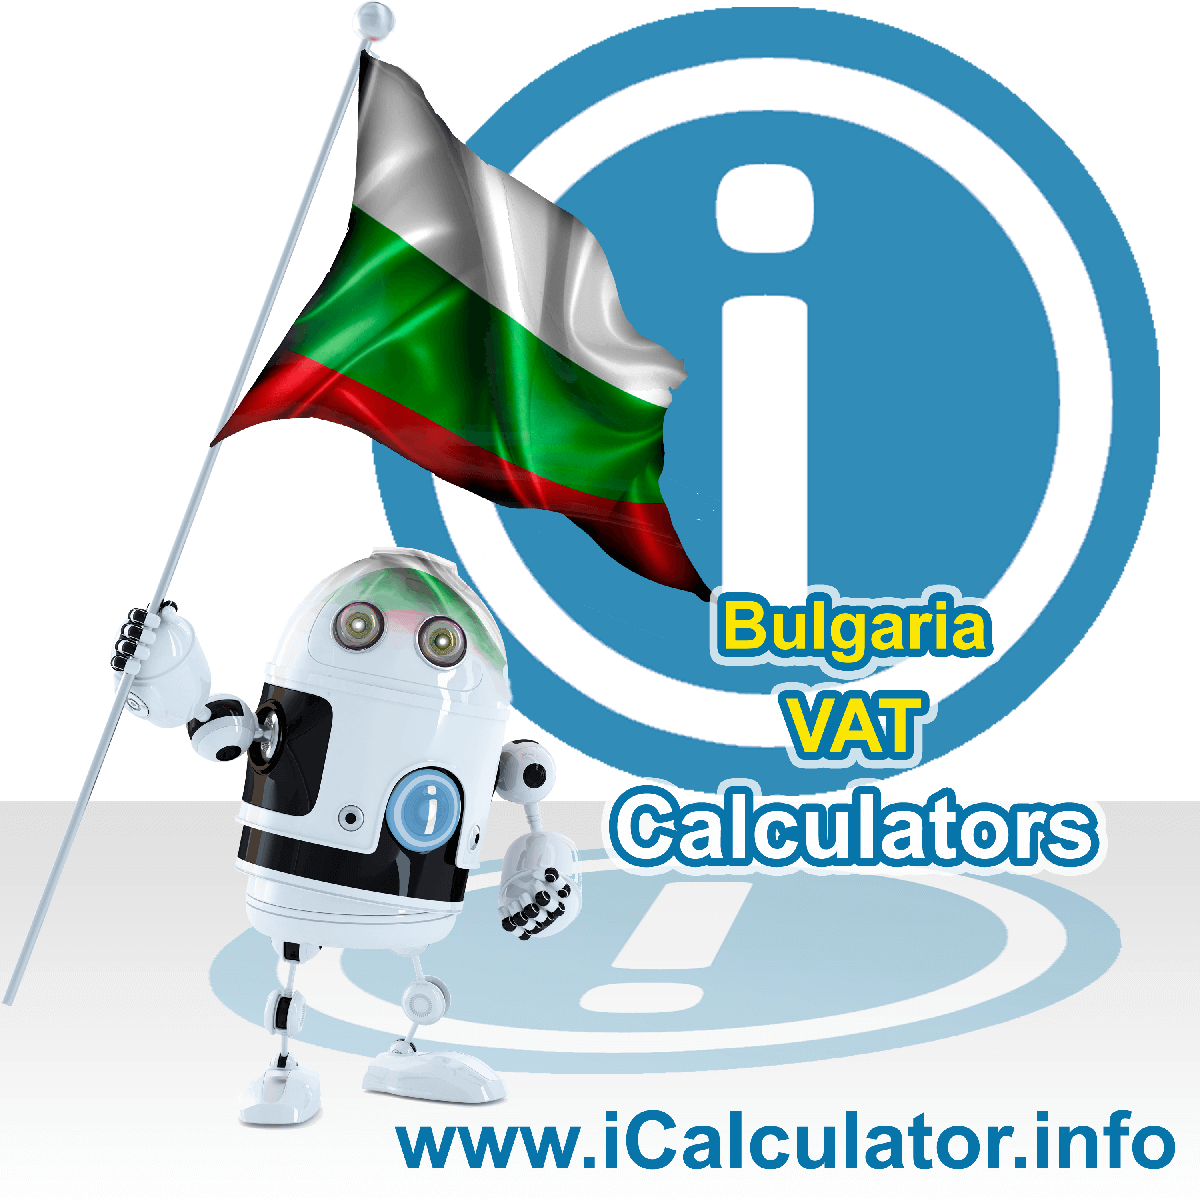 Bulgaria VAT Calculator. This image shows the Bulgaria flag and information relating to the VAT formula used for calculating Value Added Tax in Bulgaria using the Bulgaria VAT Calculator in 2023